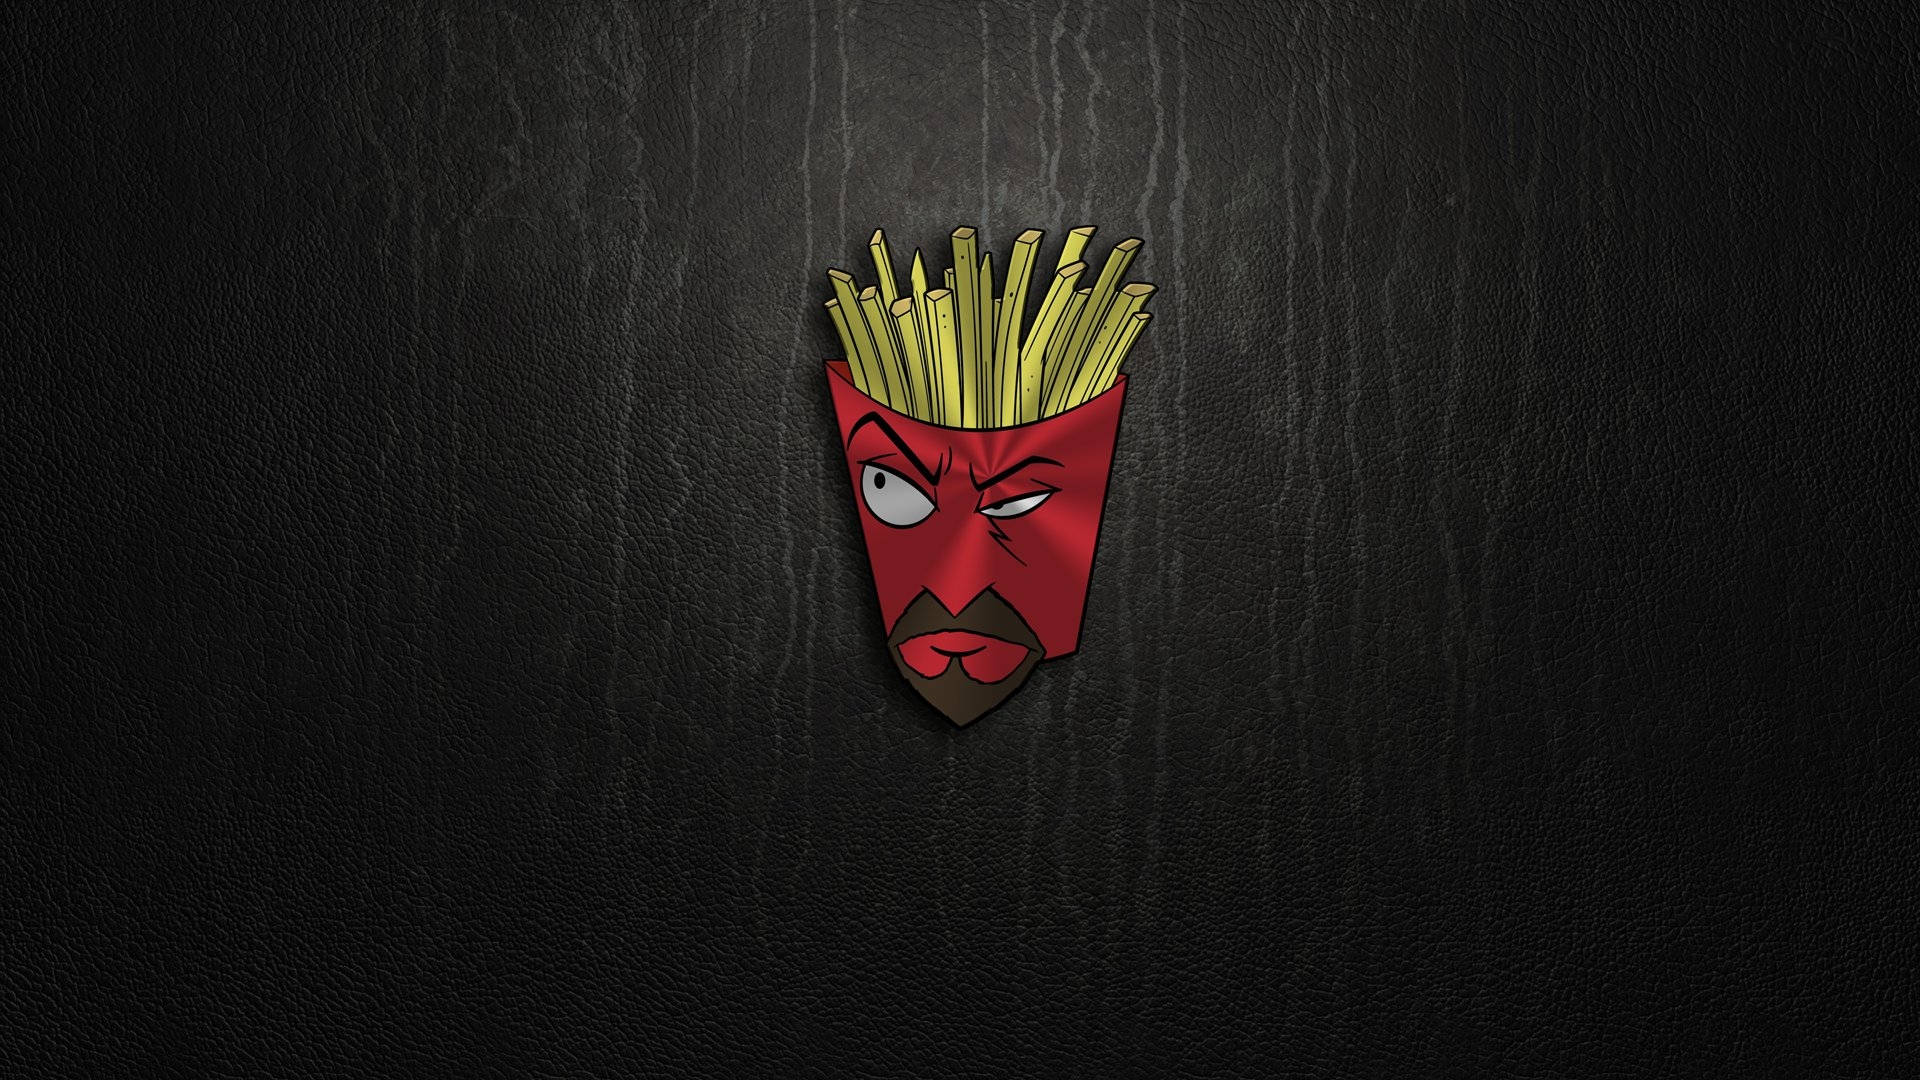 Caption: The Leading Characters From Aqua Teen Hunger Force: Frylock Background